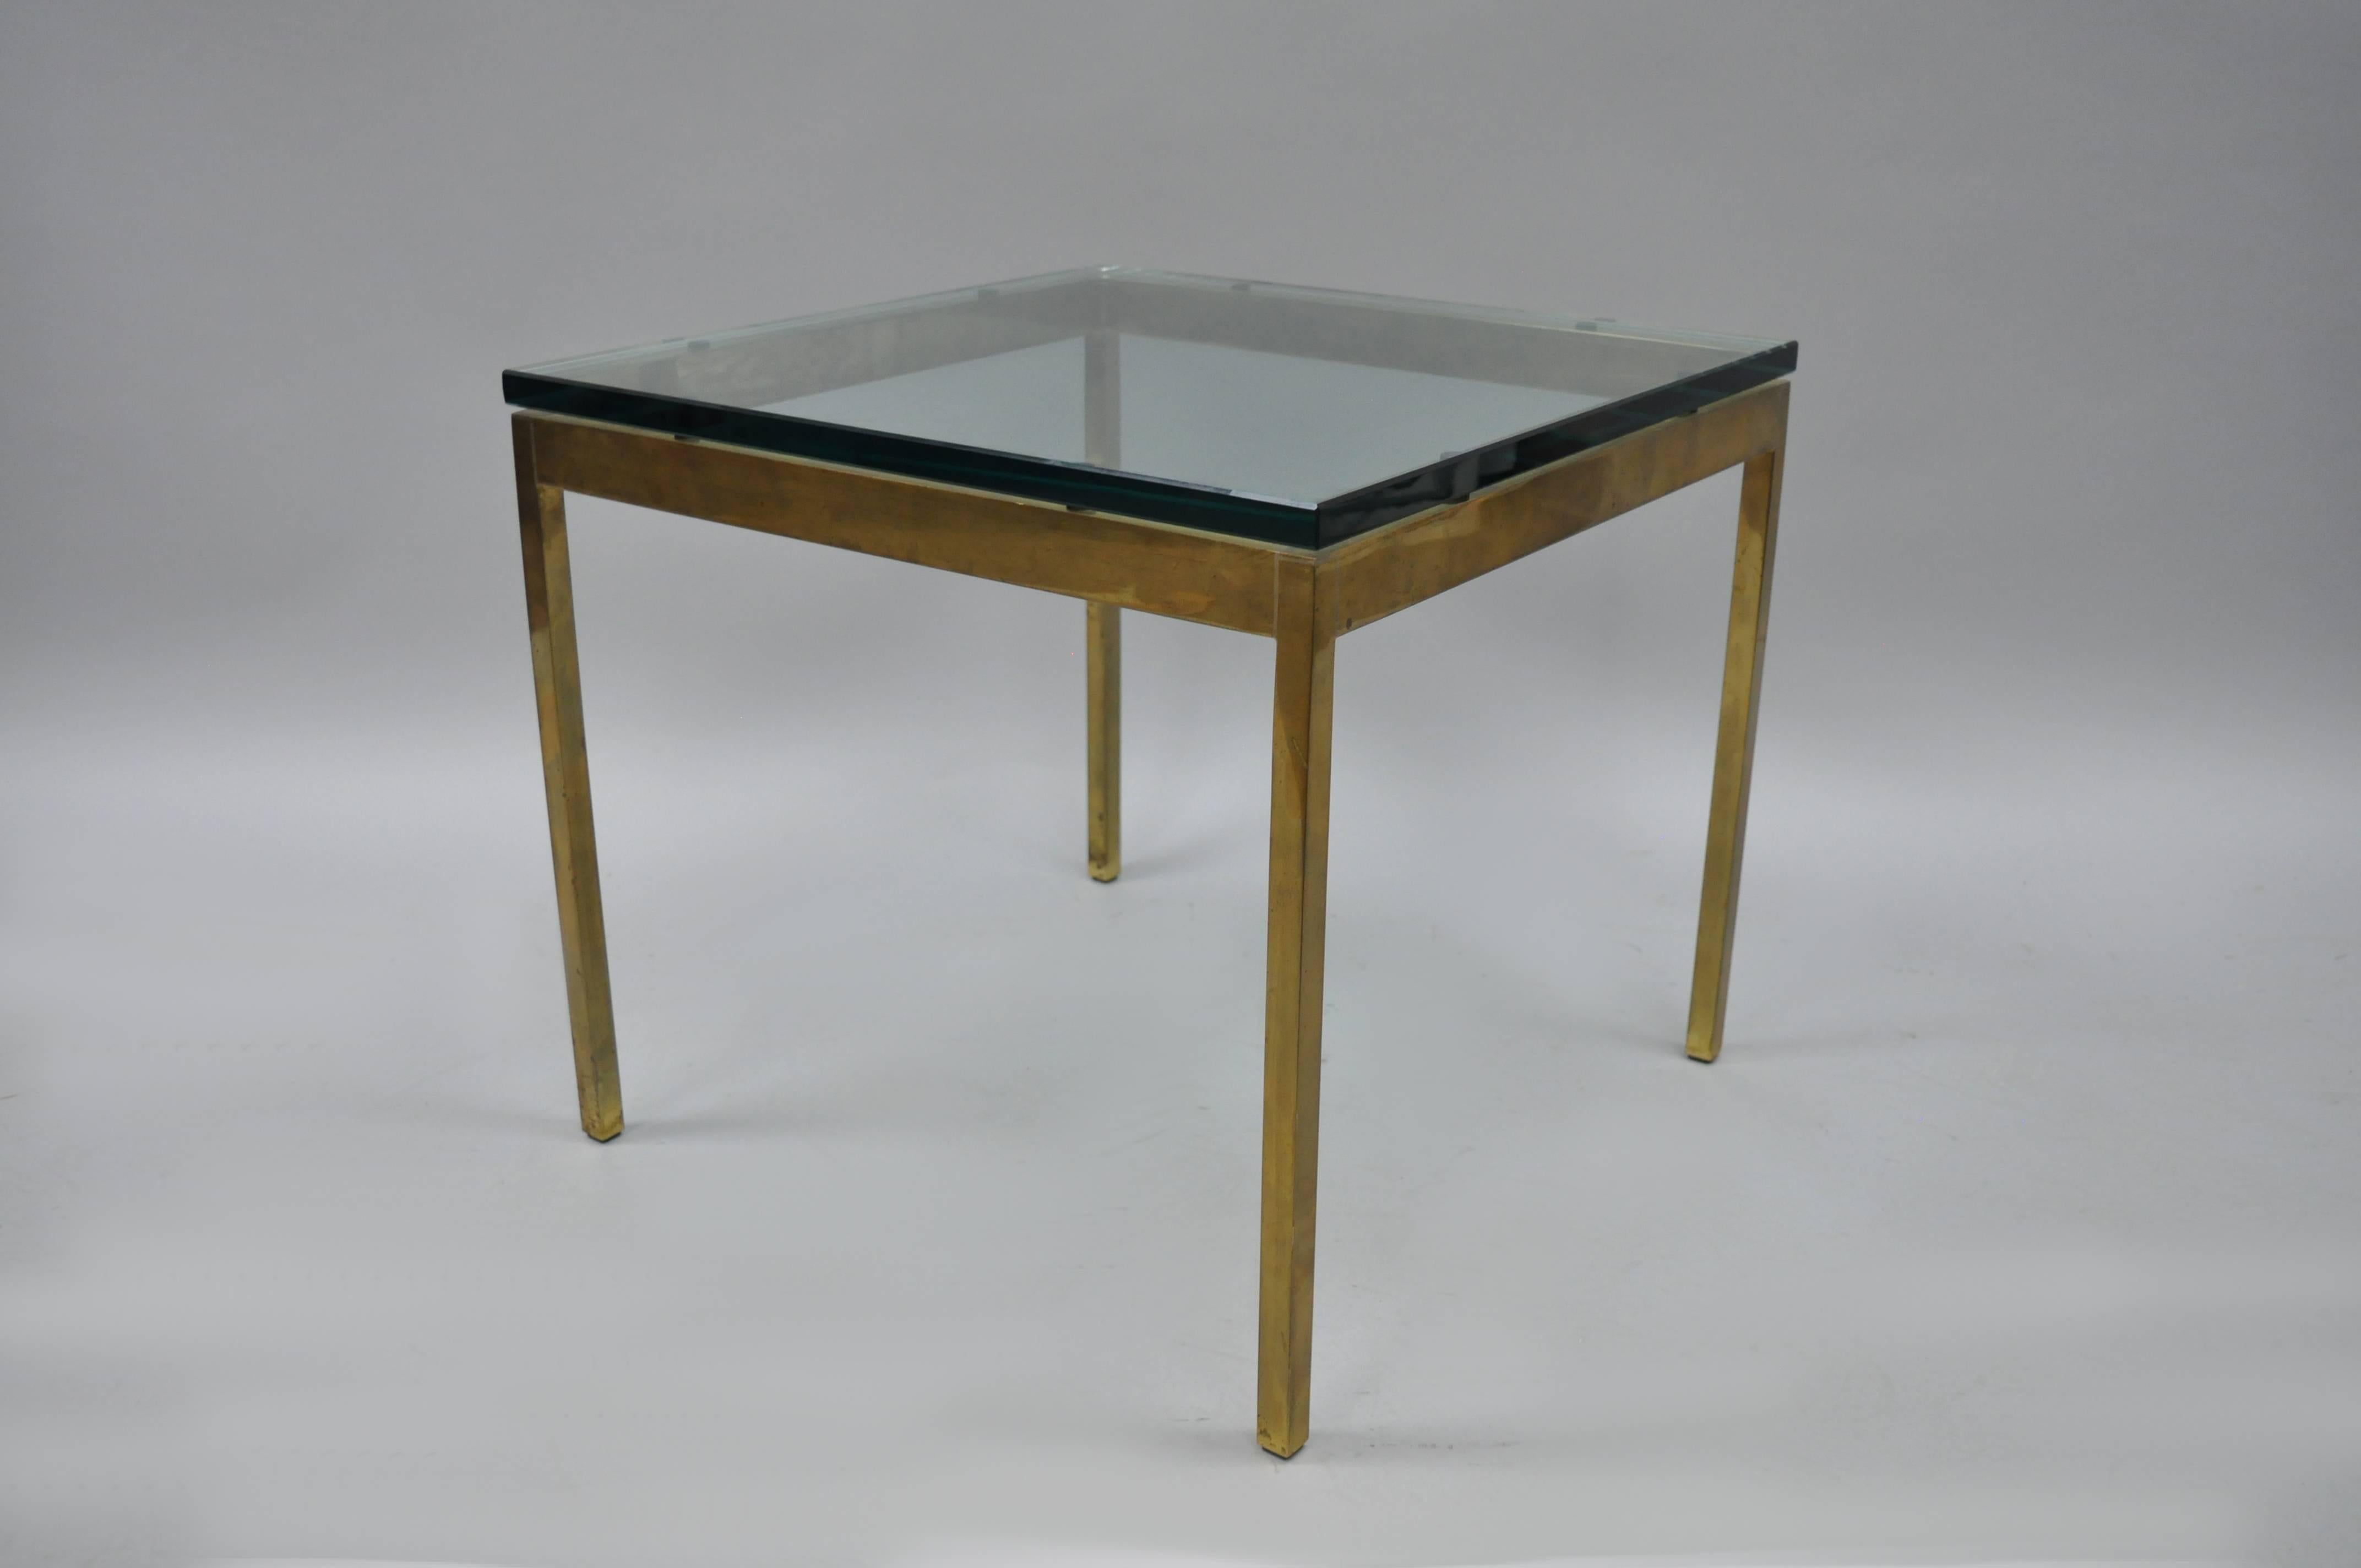 Vintage Mid-Century Modern burnished brass / bronze finish accent table by Scope Furniture Ltd. Item features a metal base with burnished brass/bronze finish and a thick glass top. Original manufacturer label to underside.